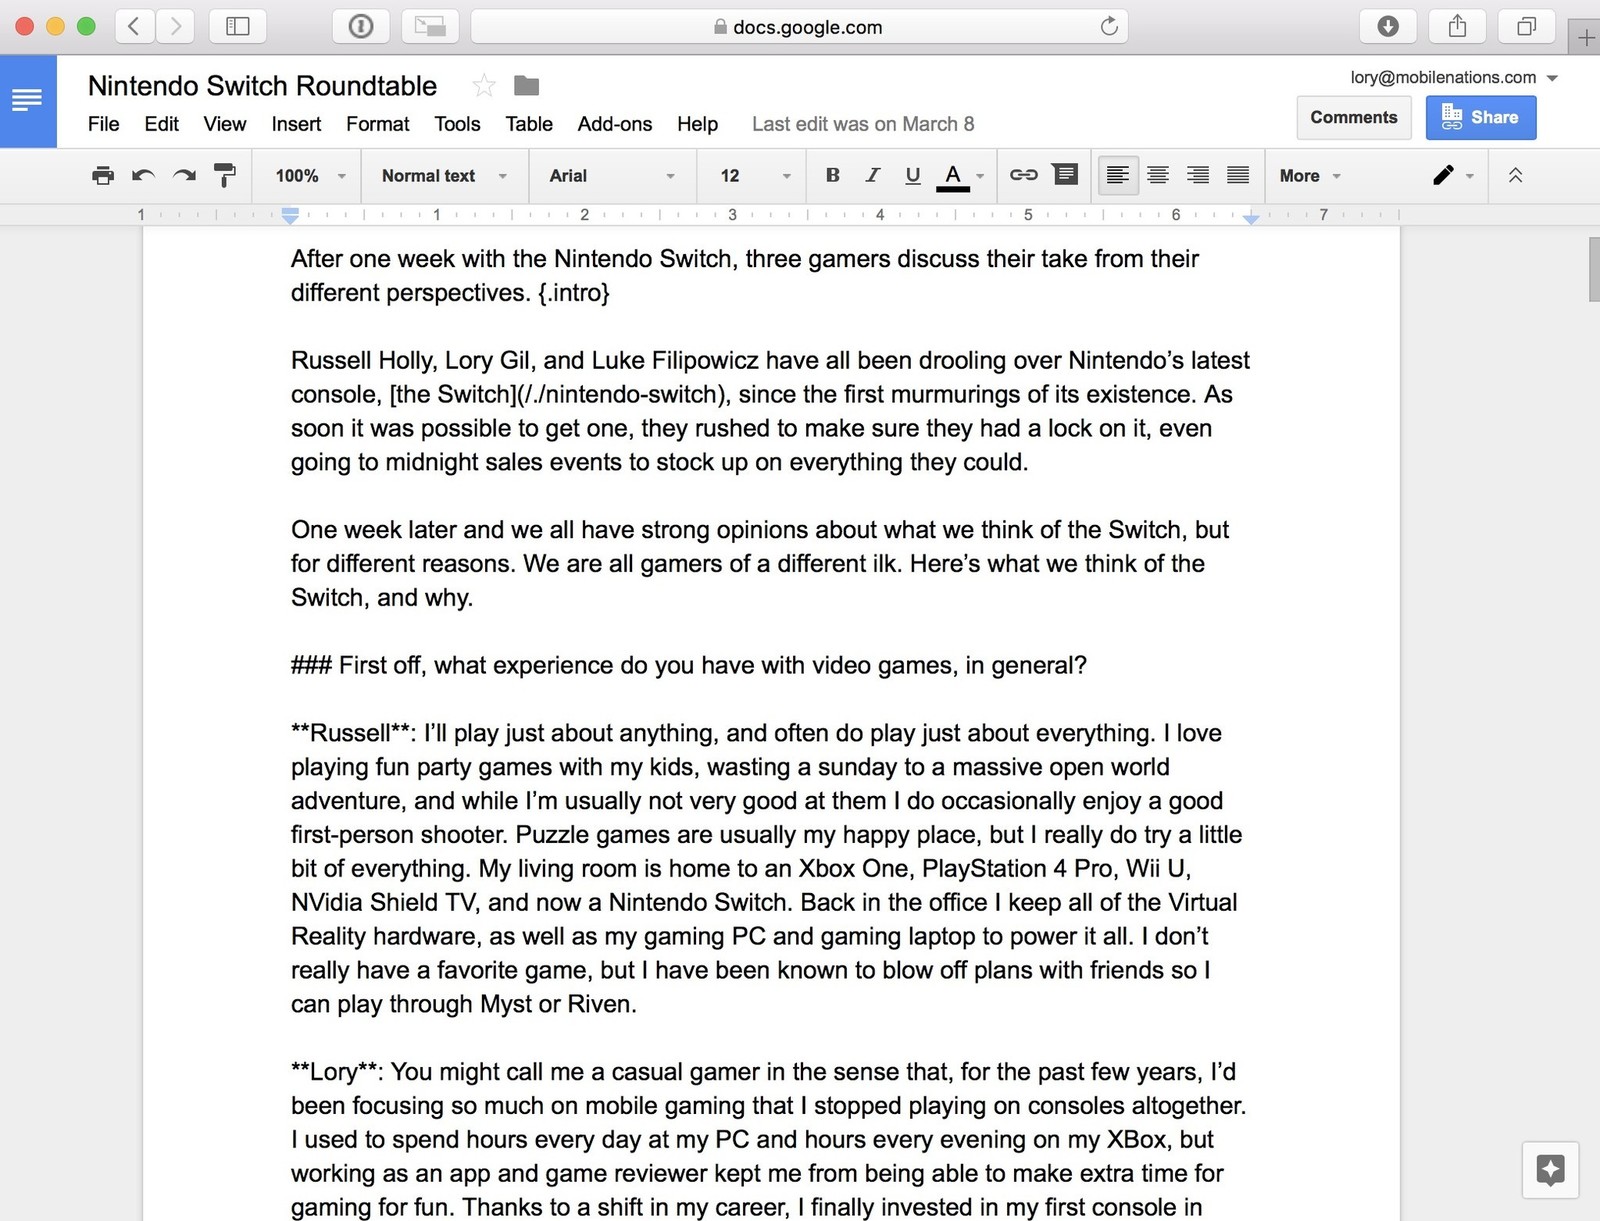 does word for mac 2011 work with split view